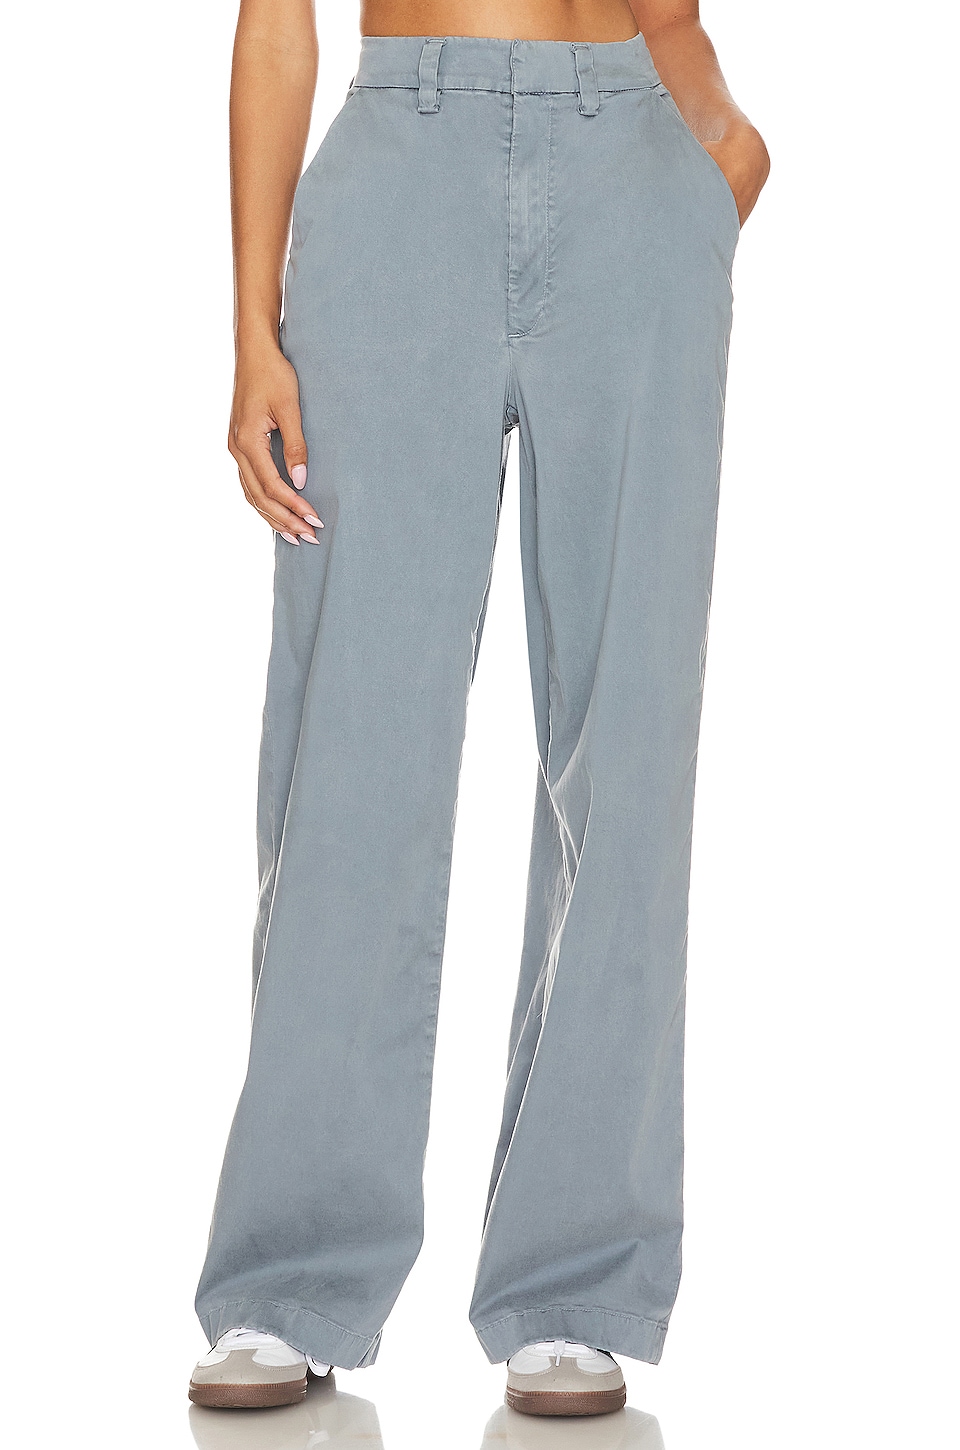 Scarlet Wide Leg Flare Pant In Chambray